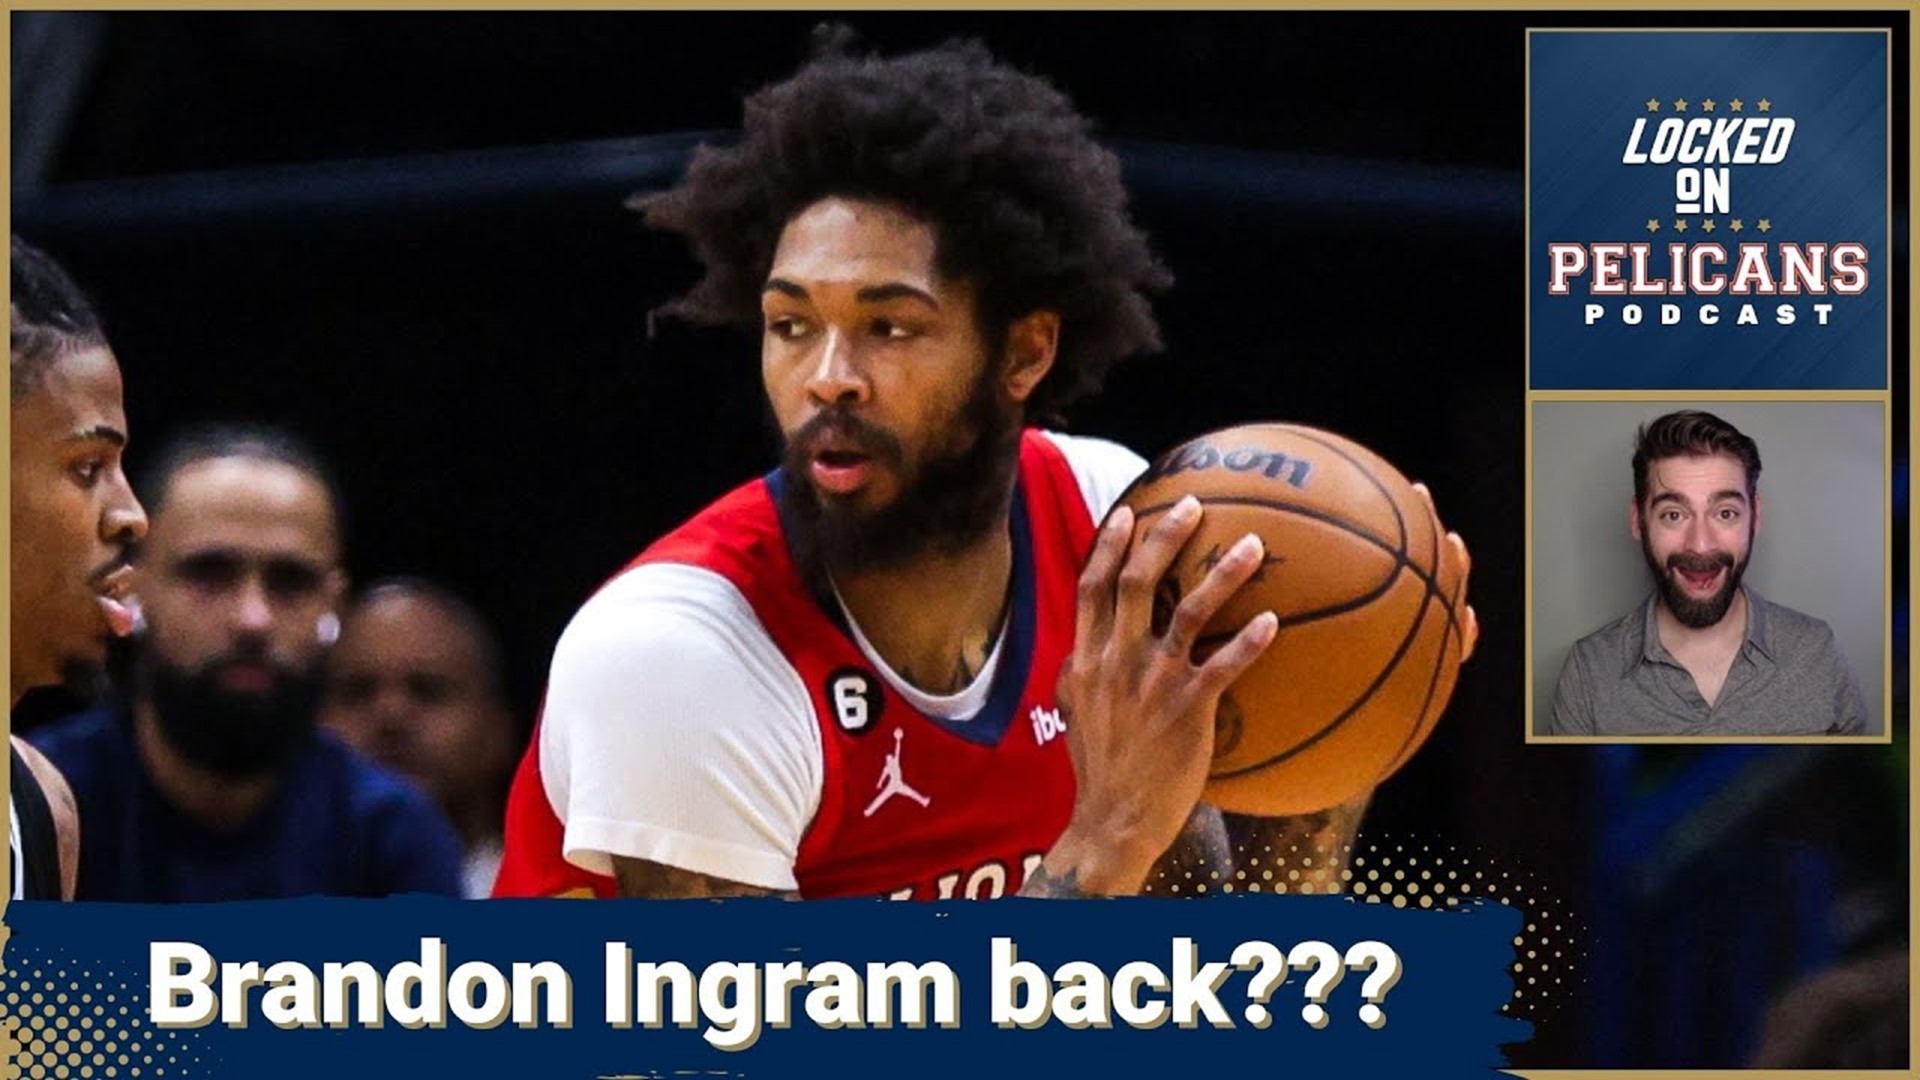 Brandon Ingram is set to return from injury this week for the New Orleans Pelicans but when exactly will he play and how will it affect the Pels?